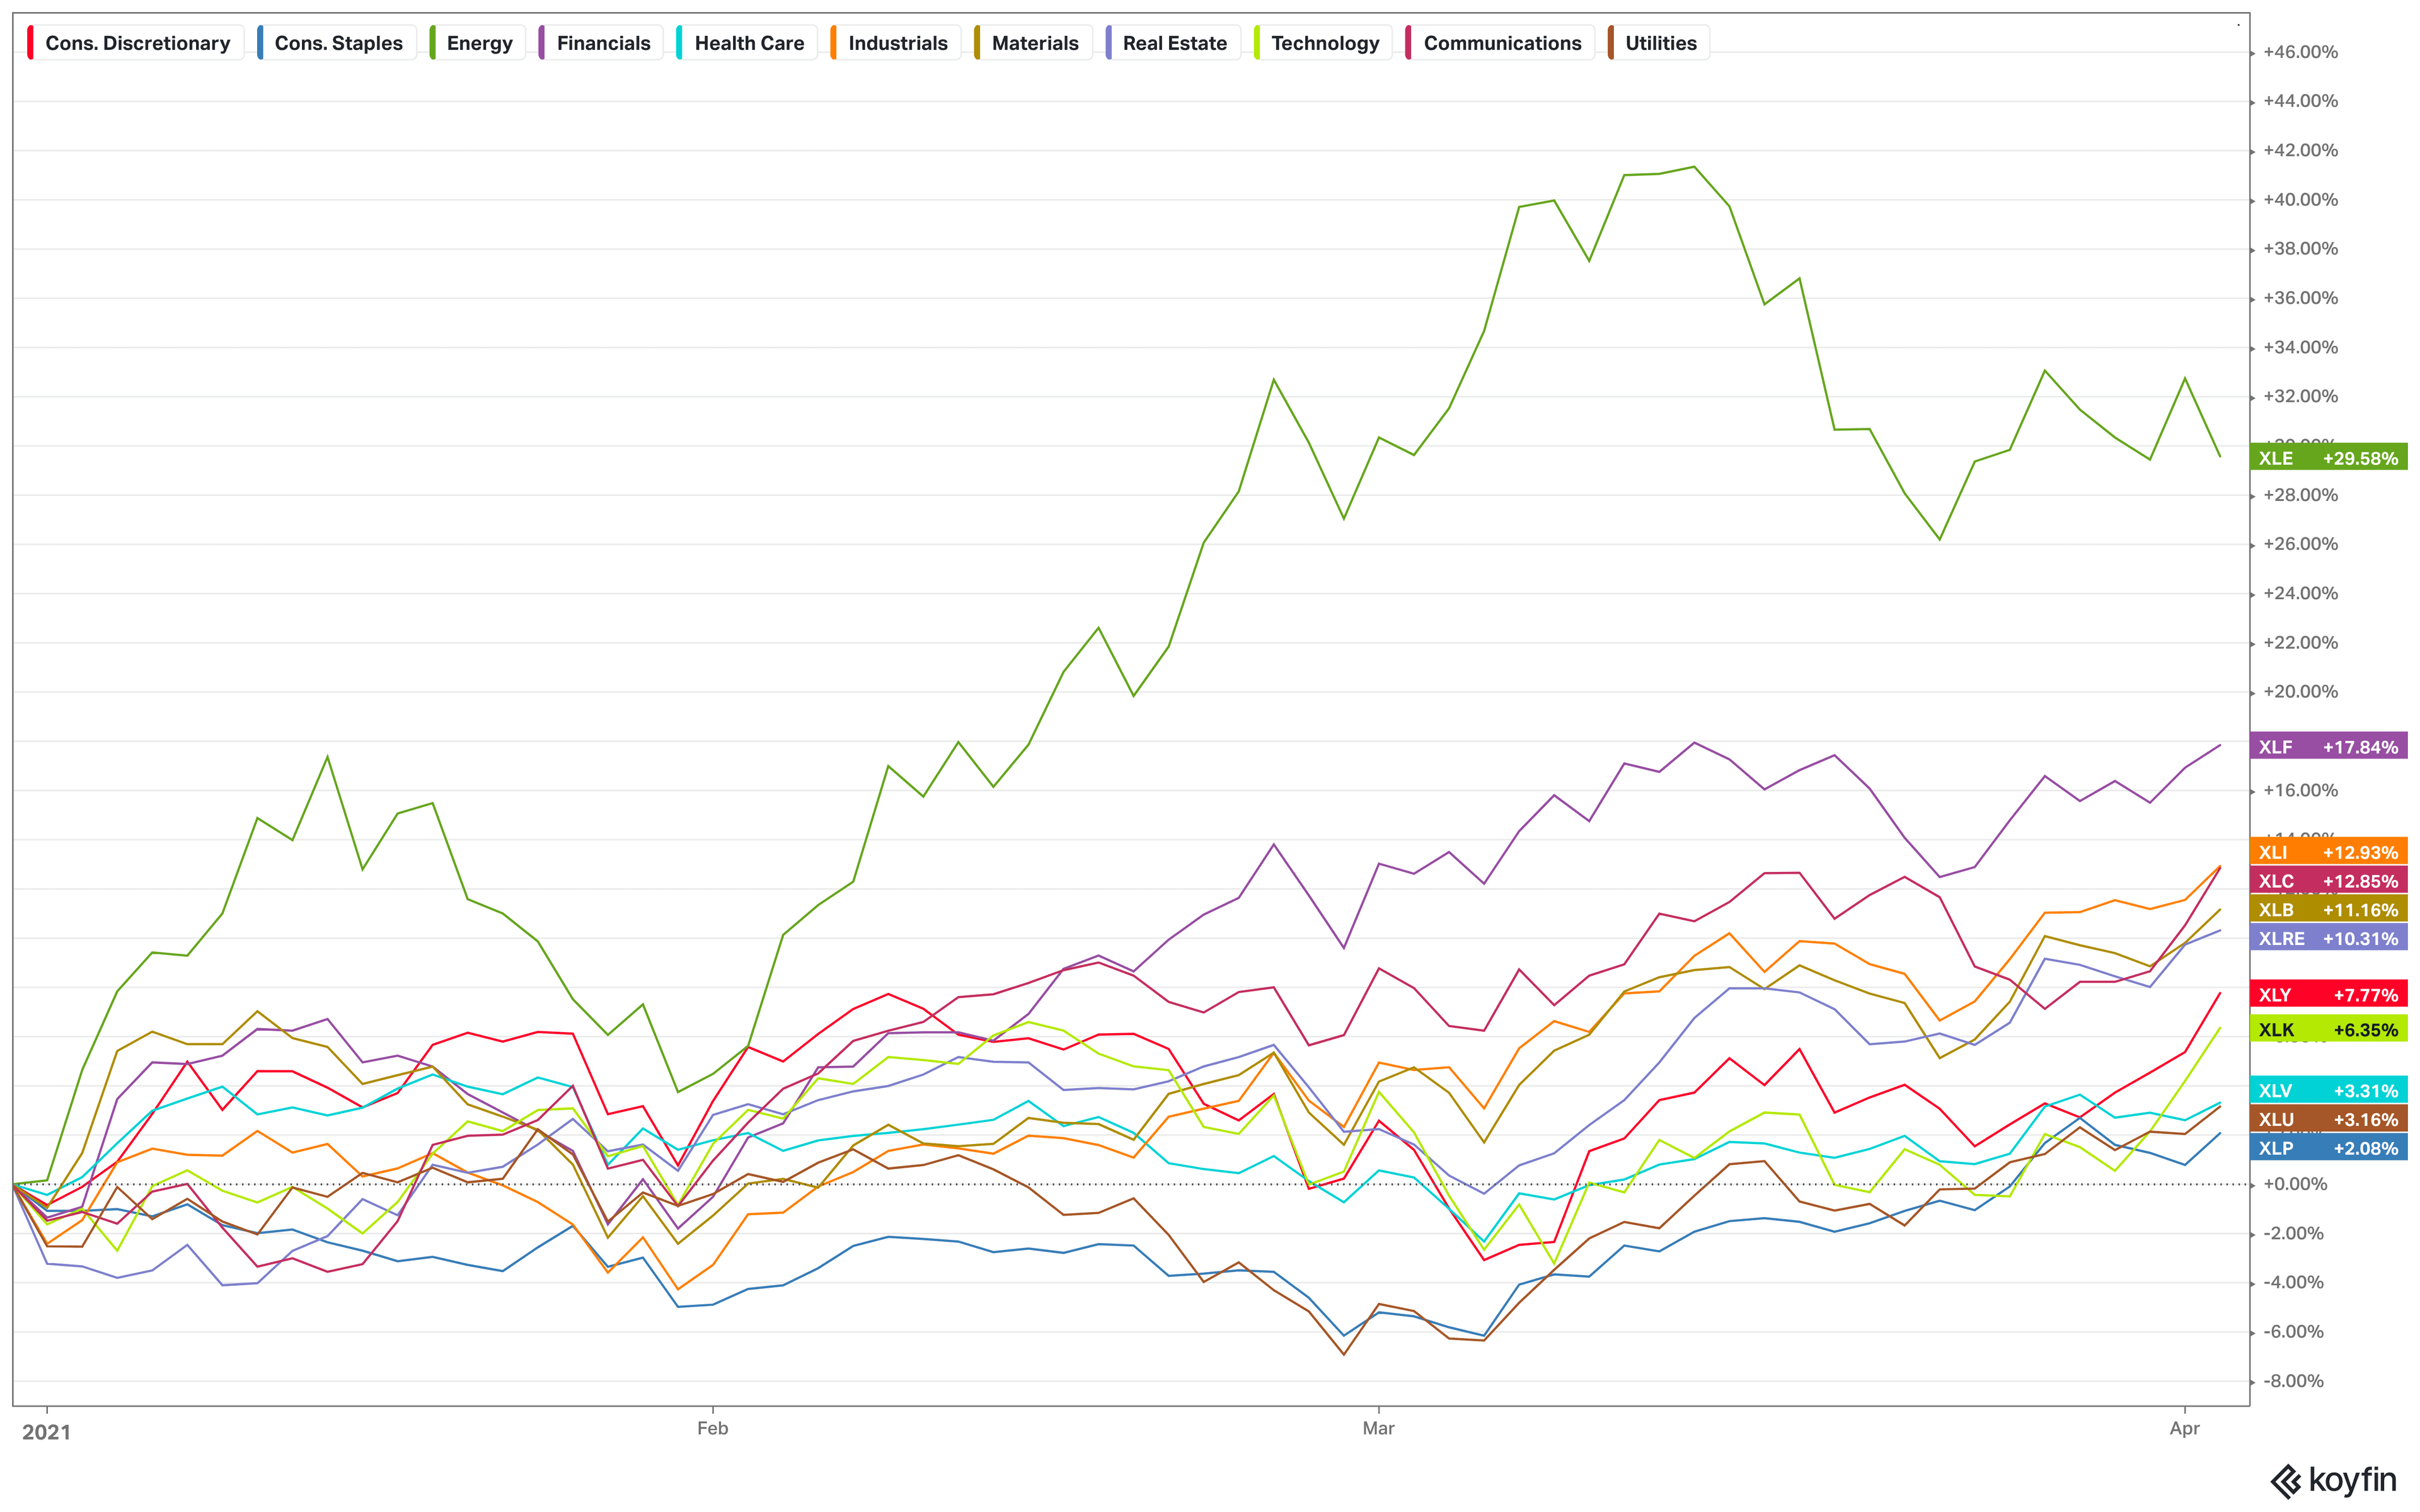 US stocks’ year-to-date performance by sector (Source: Koyfin)